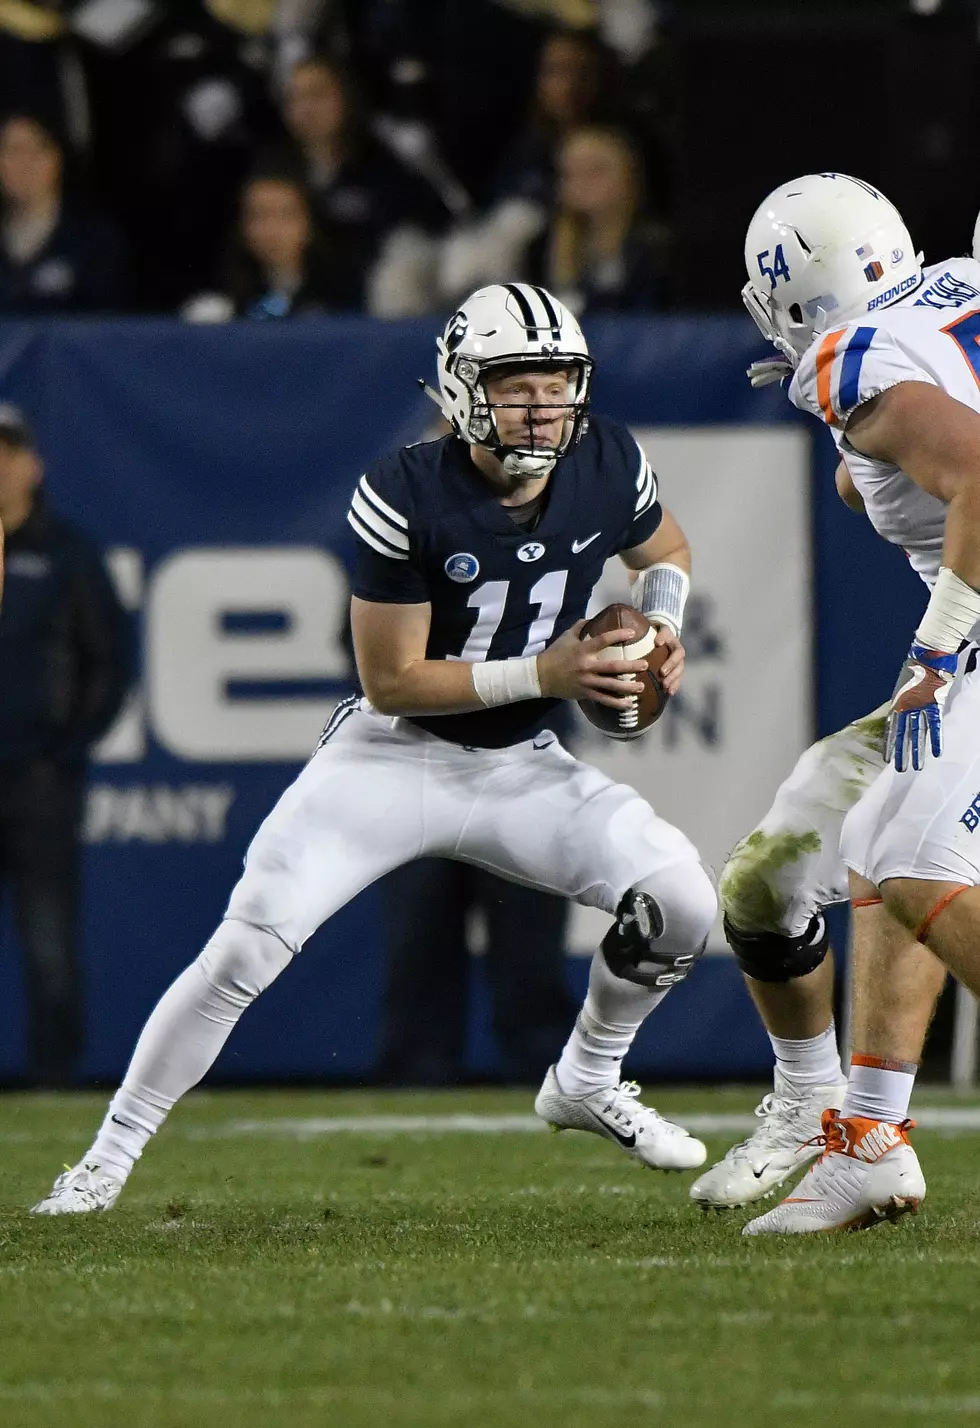 Built Bar Will Pay Tuition for 36 BYU Football Walk-Ons